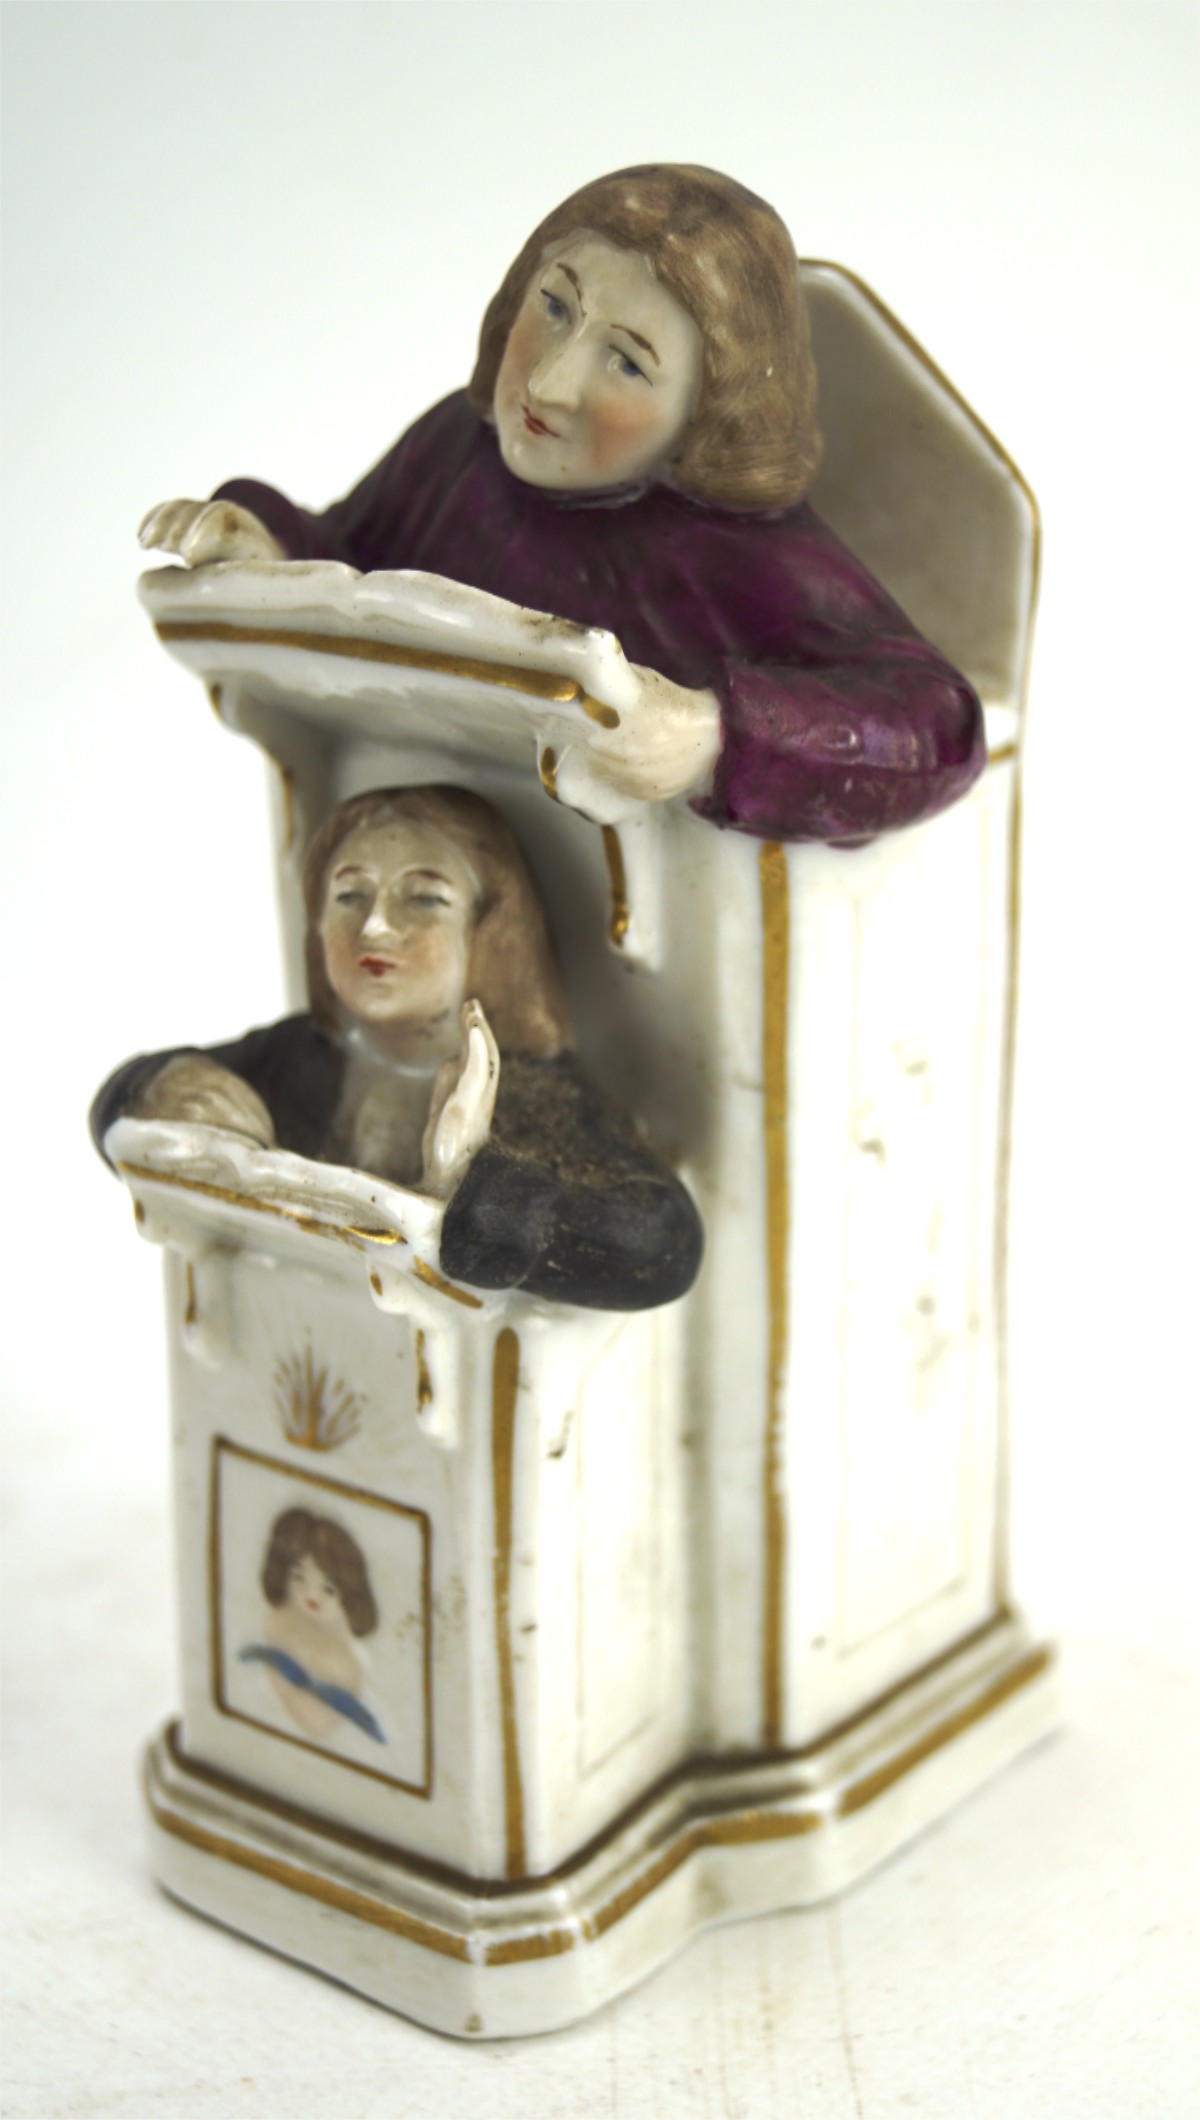 A late 19th century continental porcelain figure depicting John Wesley the preacher,